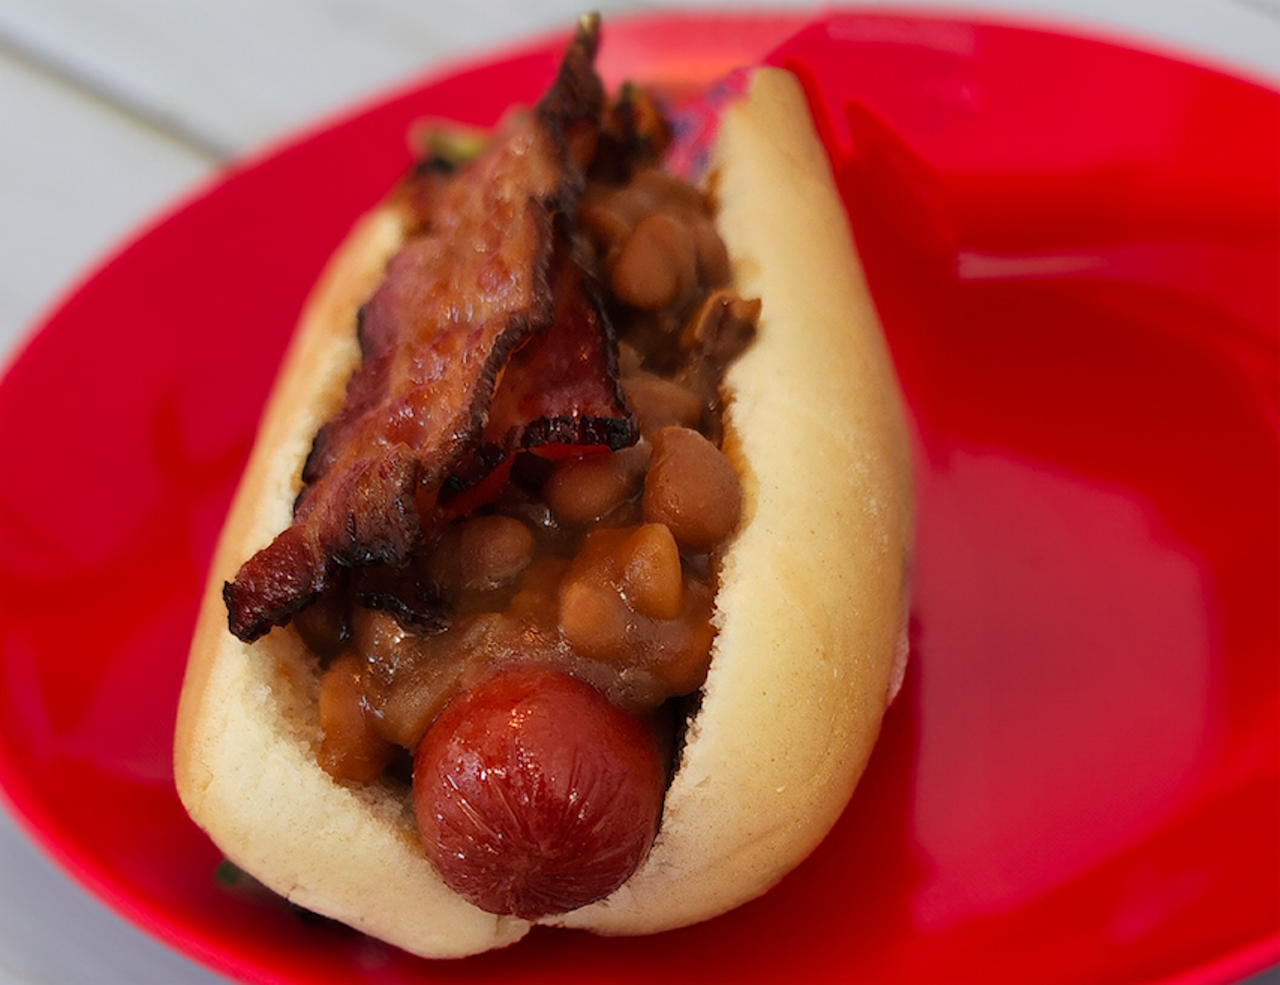 CAMPFIRE DOG
An all beef hotdog topped with baked beans and Applewood bacon.
DeAnna's Donut Burger